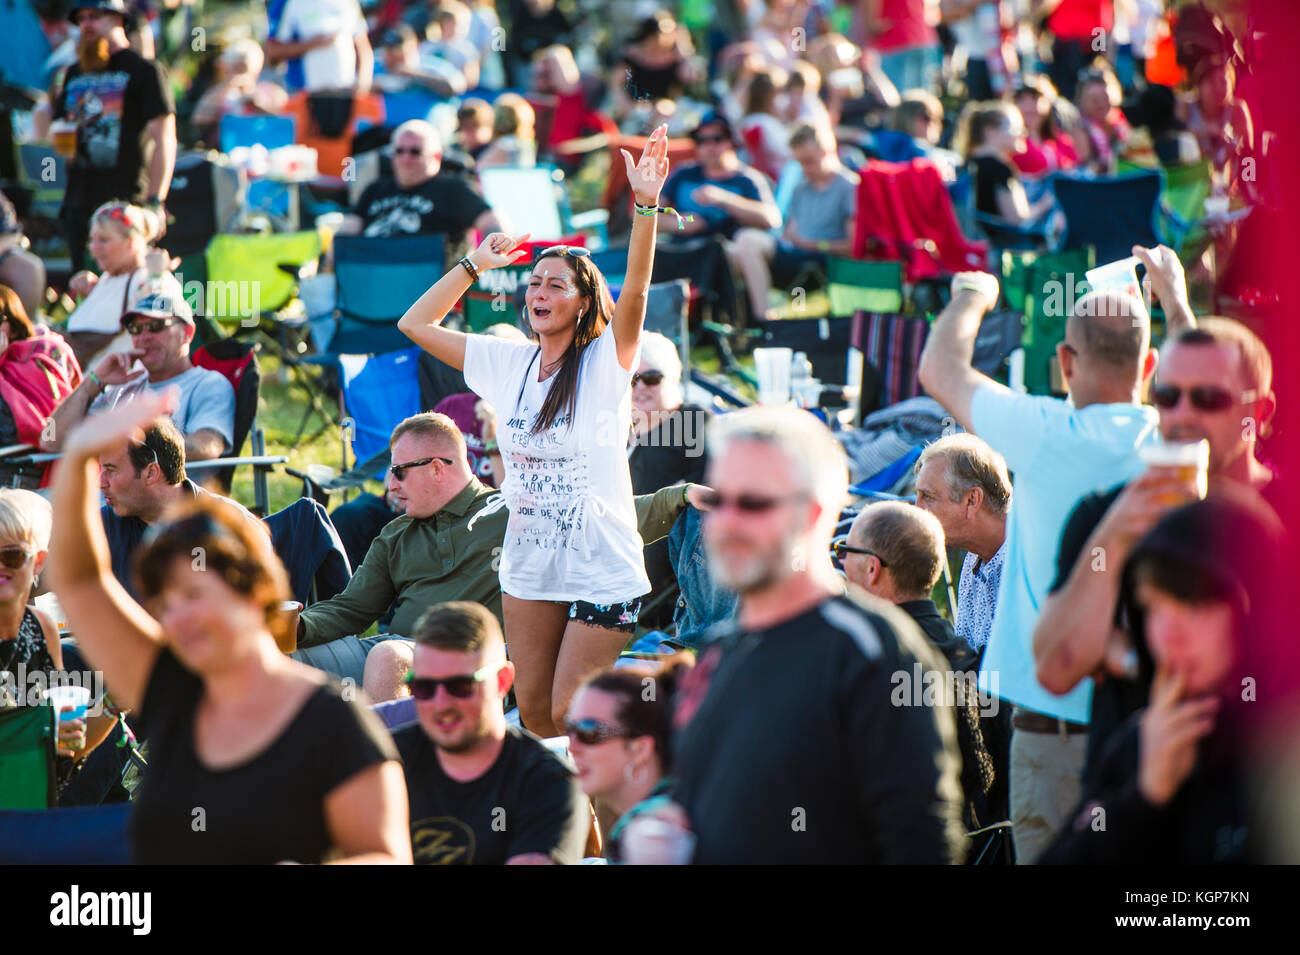 Crowds of fans enjoying the performances at the Big Tribute music festival, held on the outskirts of Aberystwyth Wales on August Bank Holiday weekend 2017. The fetsival showcases covers acts and tribute bands and attracts thousands of fans from all over the UK Stock Photo